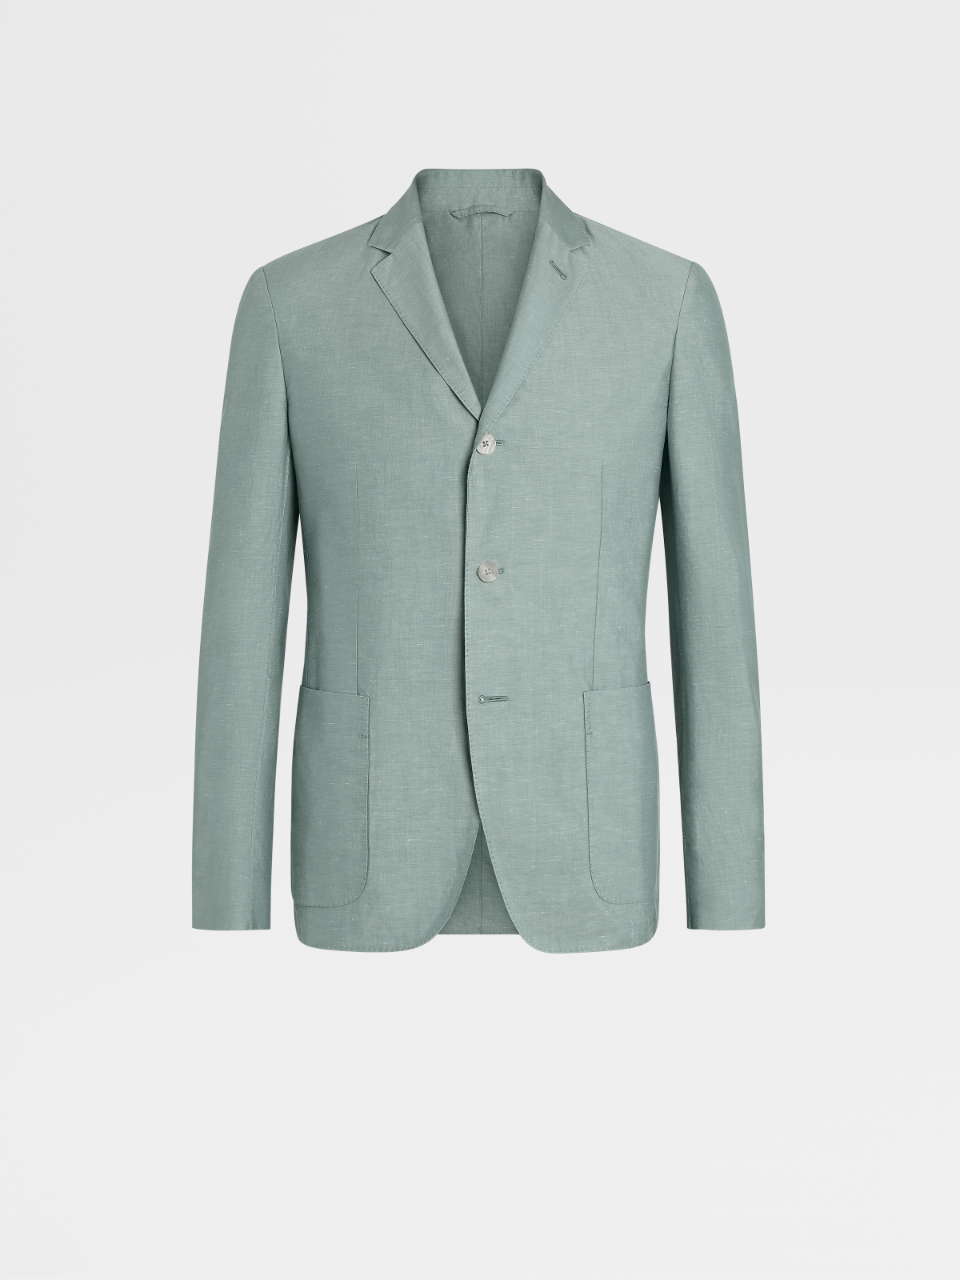 Pastel Green Cotton Linen and Silk Garment Washed Shirt Jacket, Slim Fit